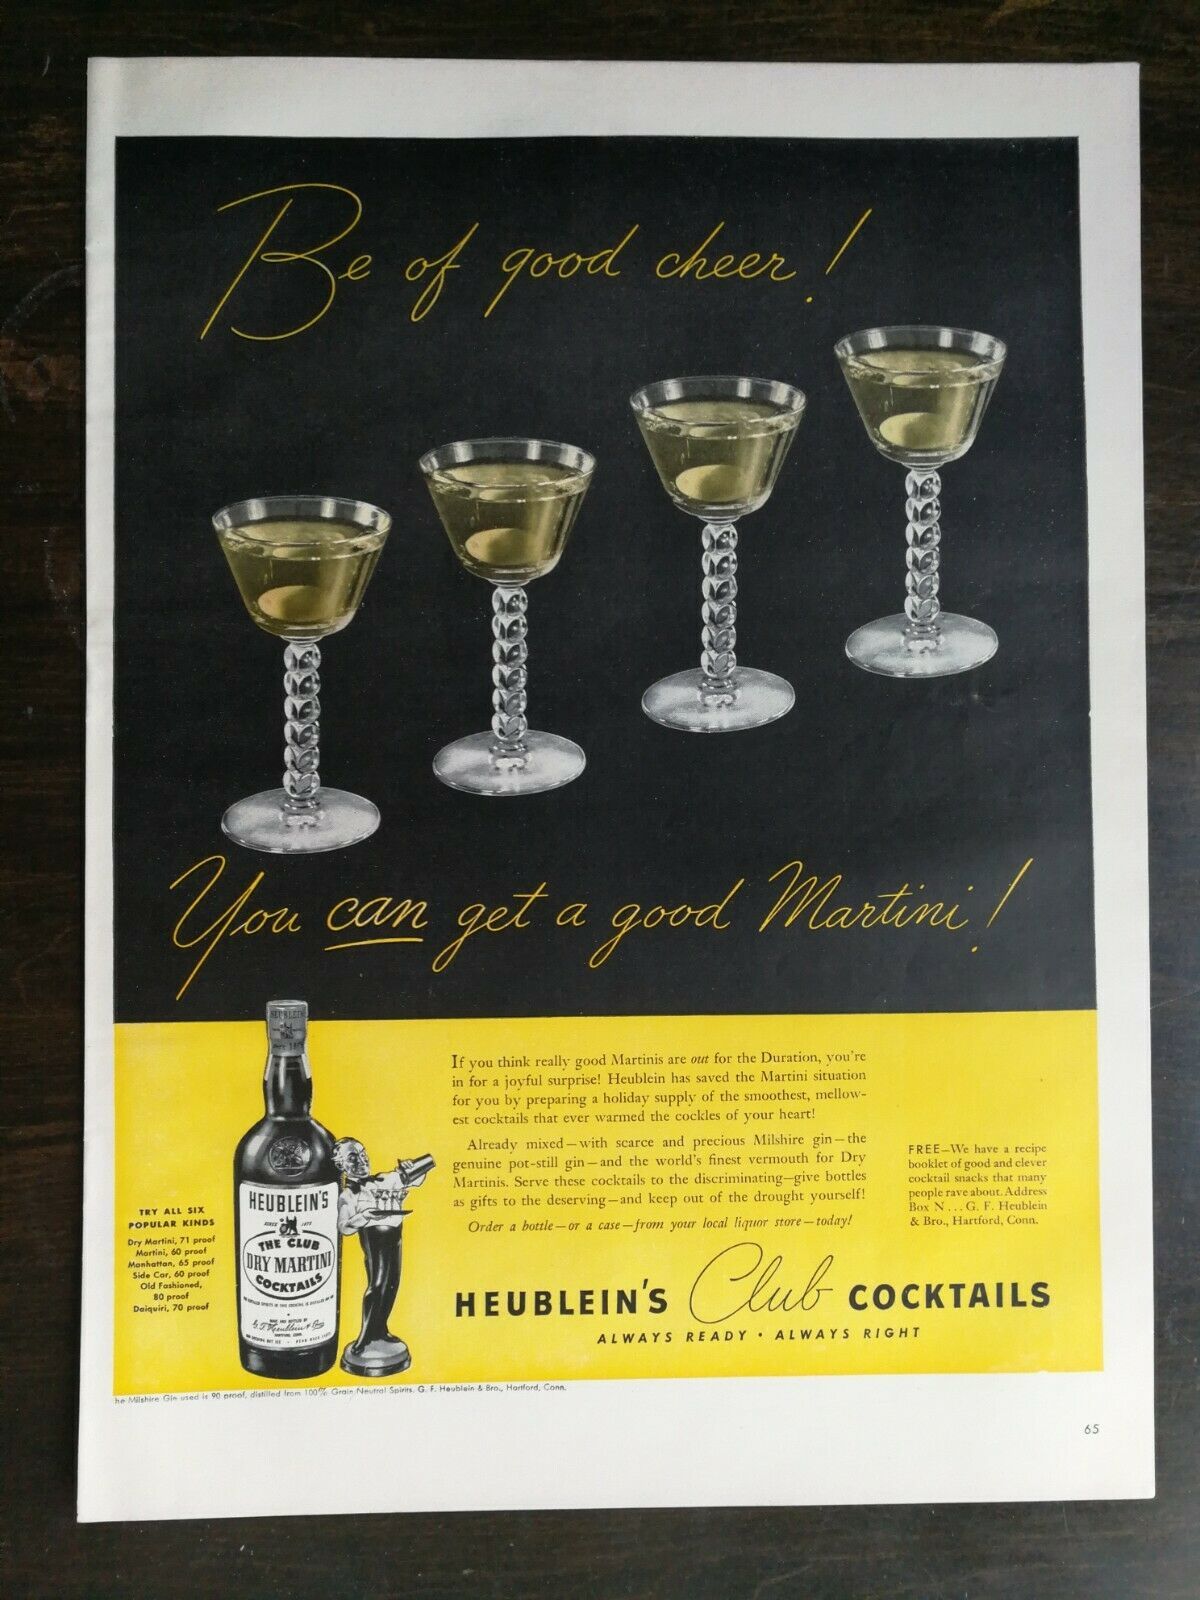 Primary image for Vintage 1942 Heublein's Club Cocktails Full Page Original Ad 721